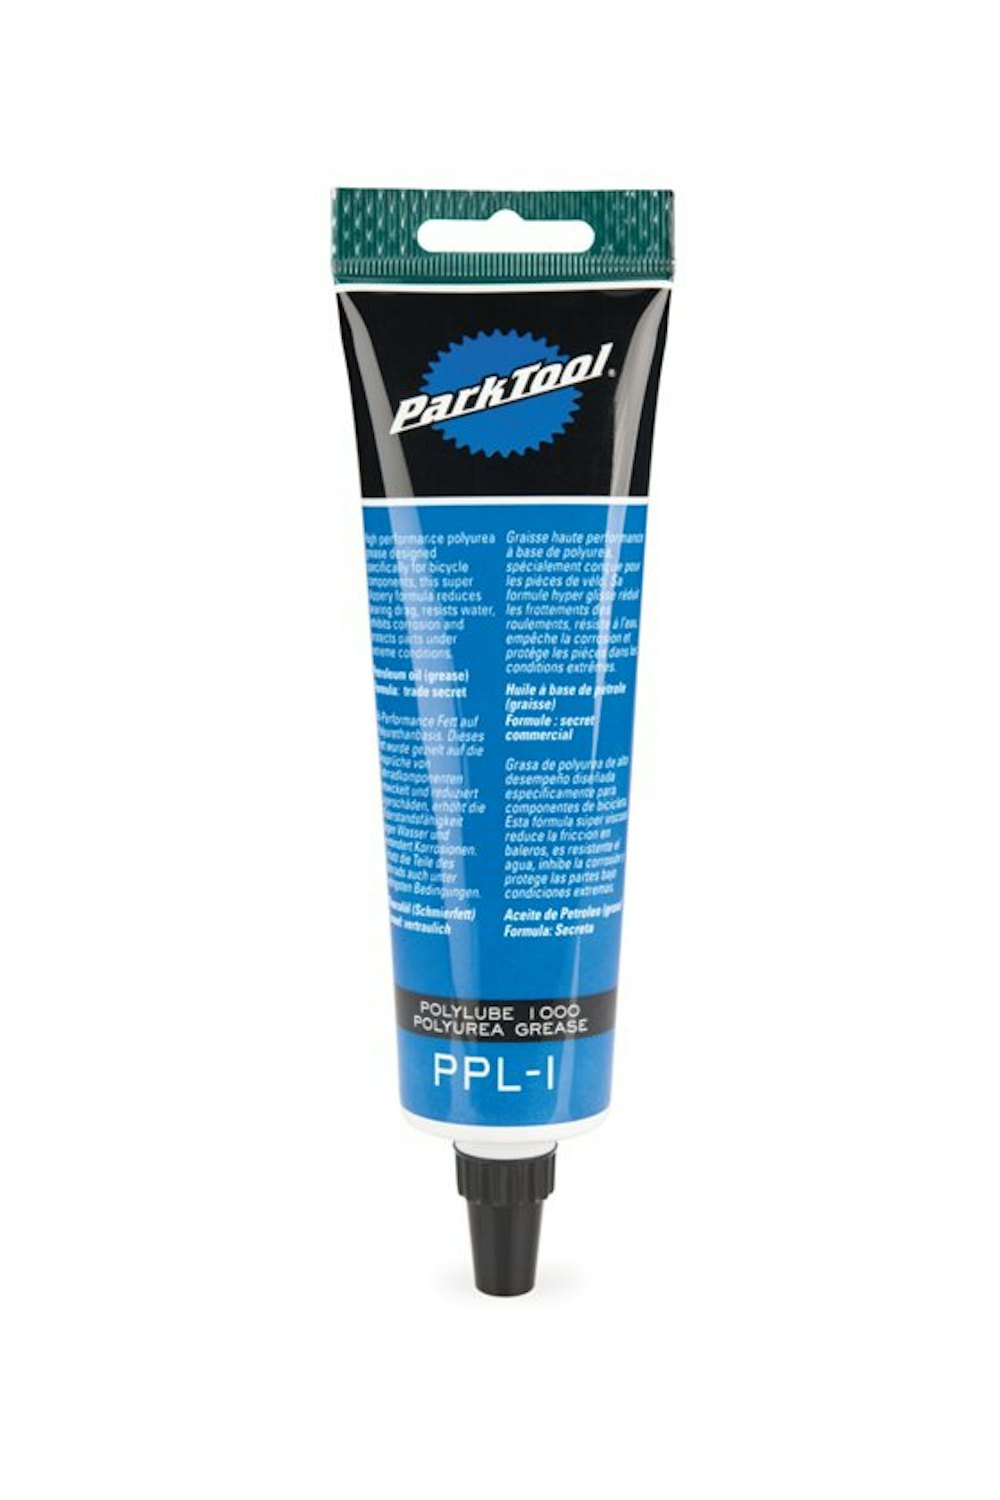 Park Tool PPL-1 Polylube 1000 Grease